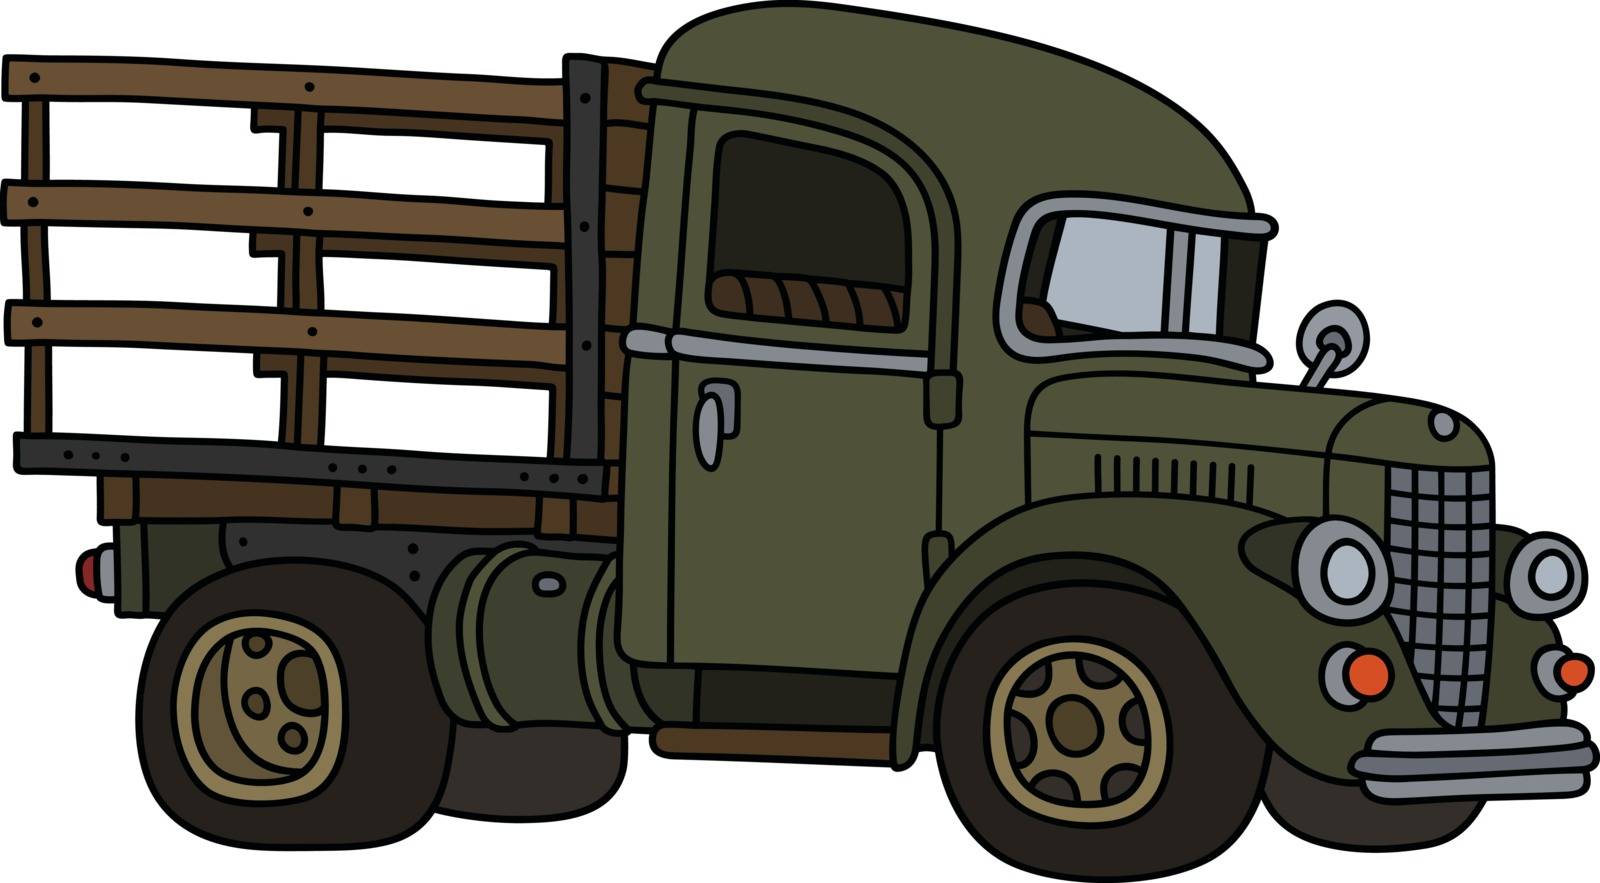 The classic green truck by vostal